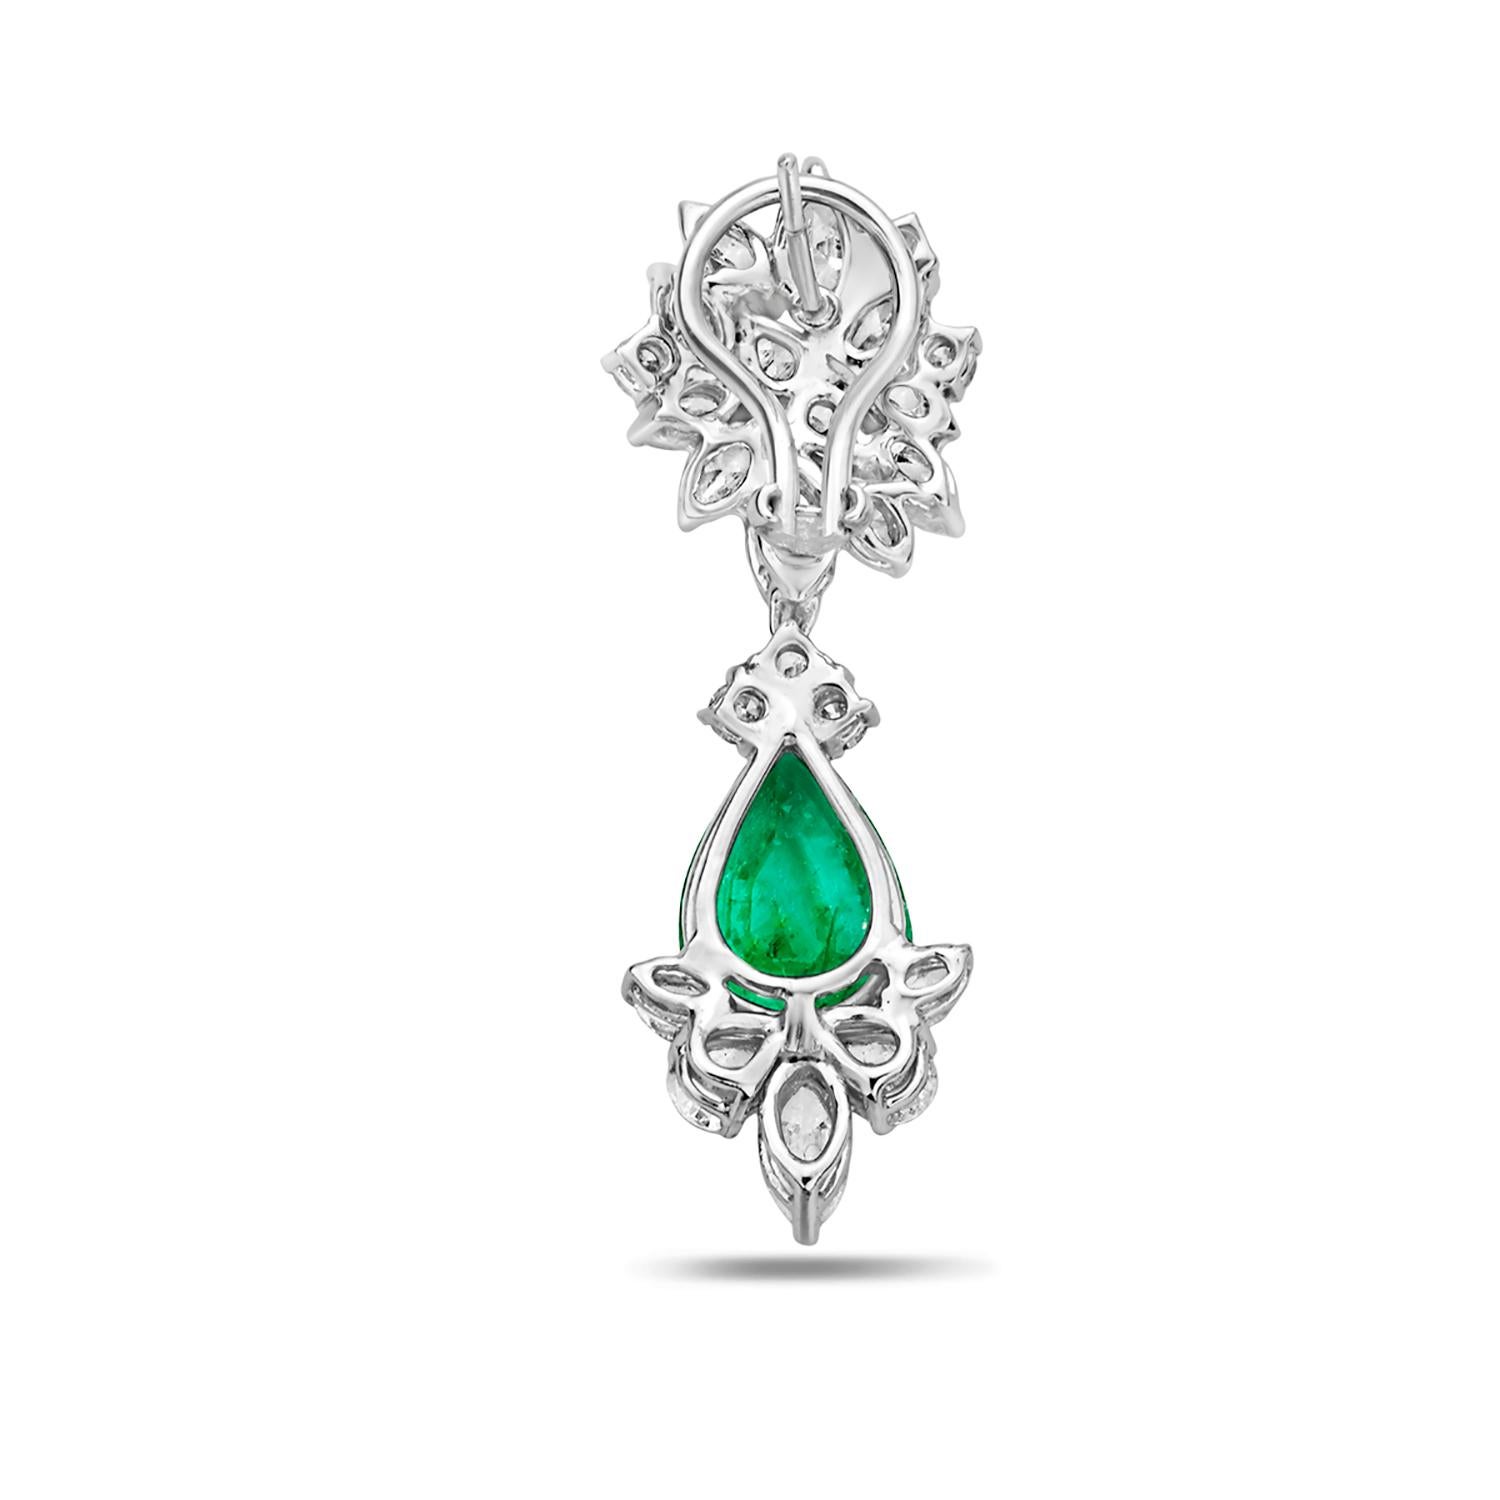 Mixed Cut Starburst Earrings With Zambian Emerald Accented With Diamonds In 18k White Gold For Sale